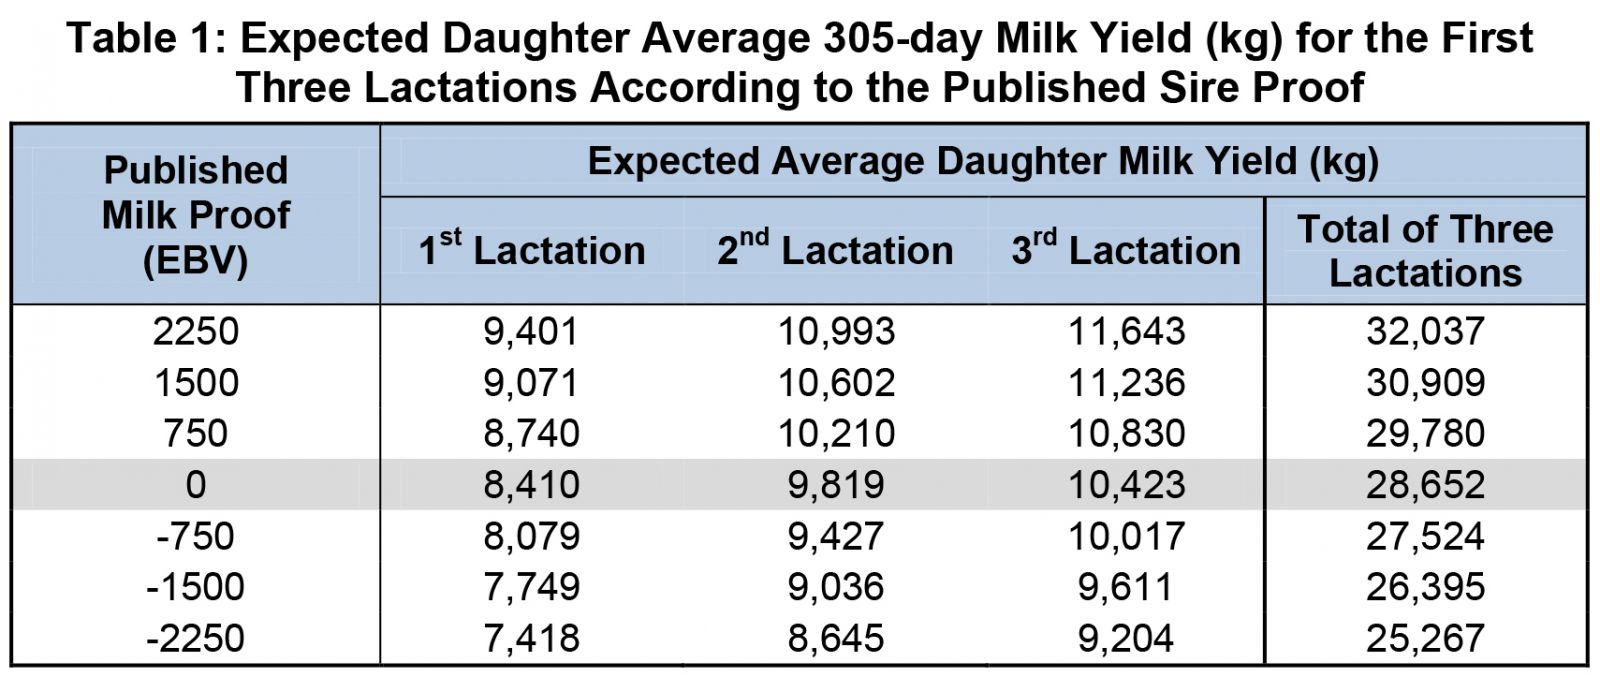 How do Production Proofs Relate to Average Daughter Yields? 